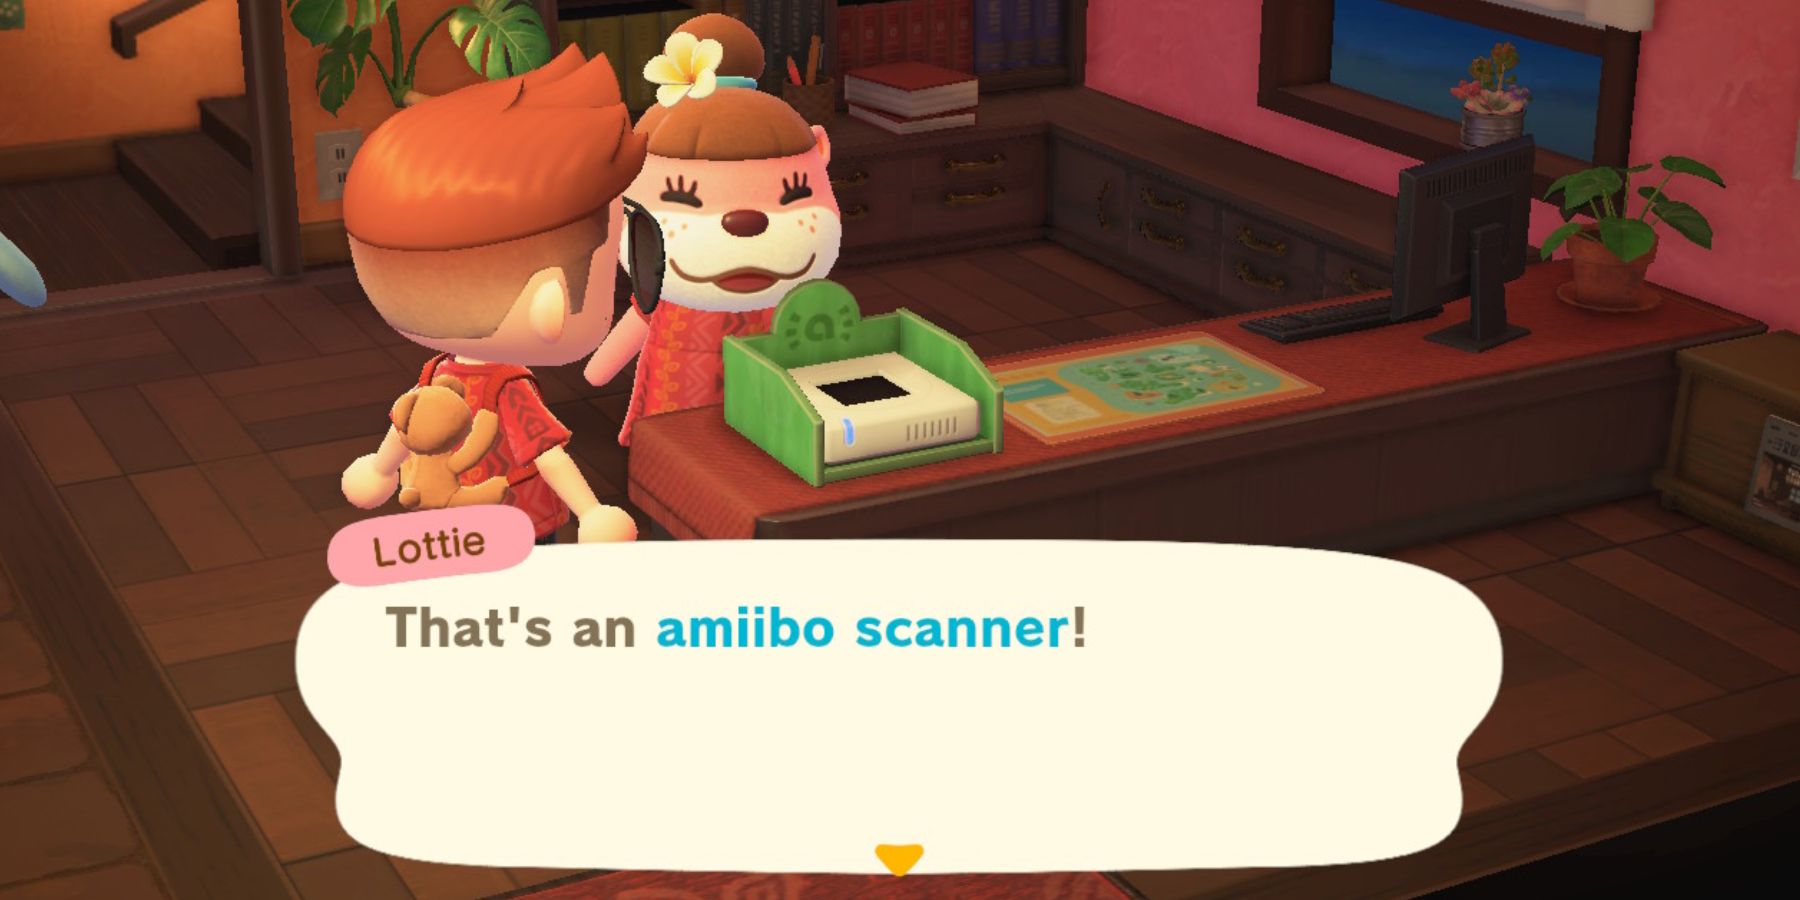 Players can unlock the Amiibo Scanner in the Paradise Planning office in Animal Crossing: New Horizons Happy Home Paradise DLC.